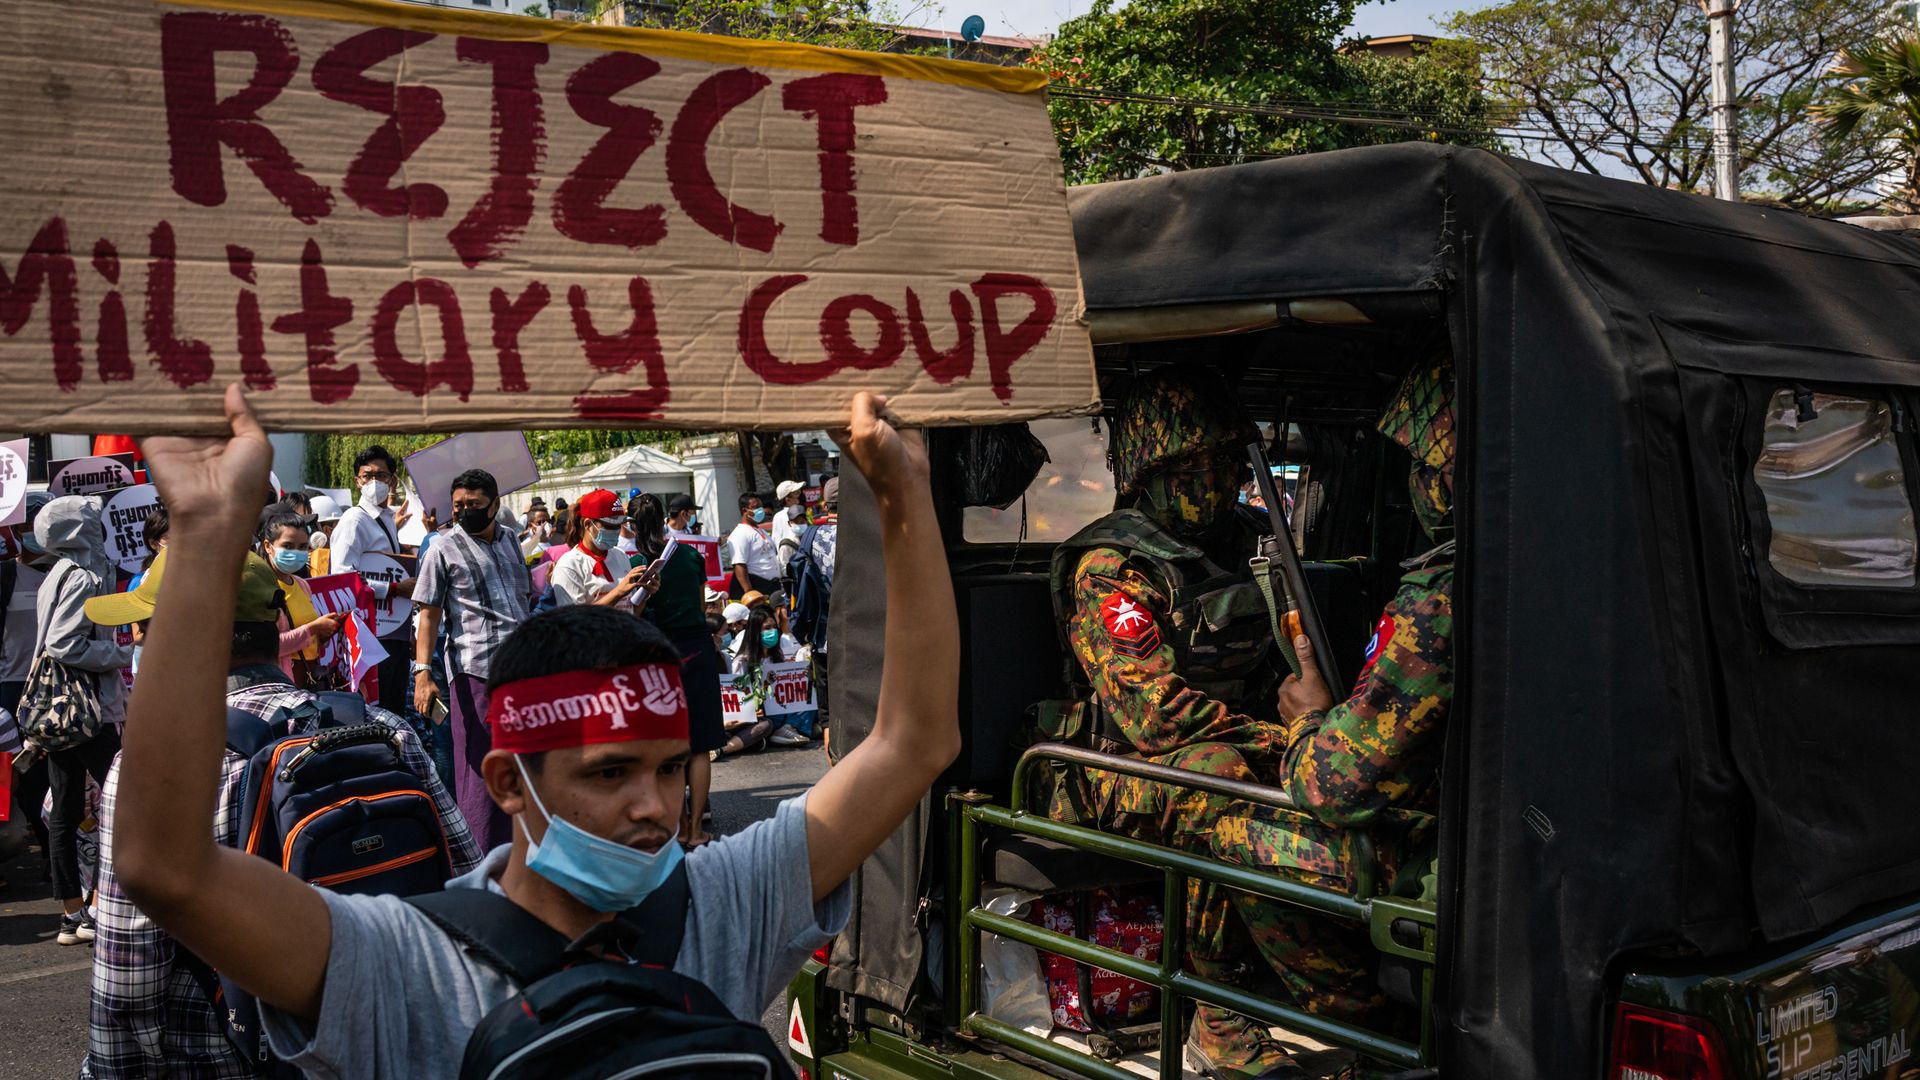 Photo of a protester holding a sign that says "Reject military coup" while walking next to a vehicle of soldiers